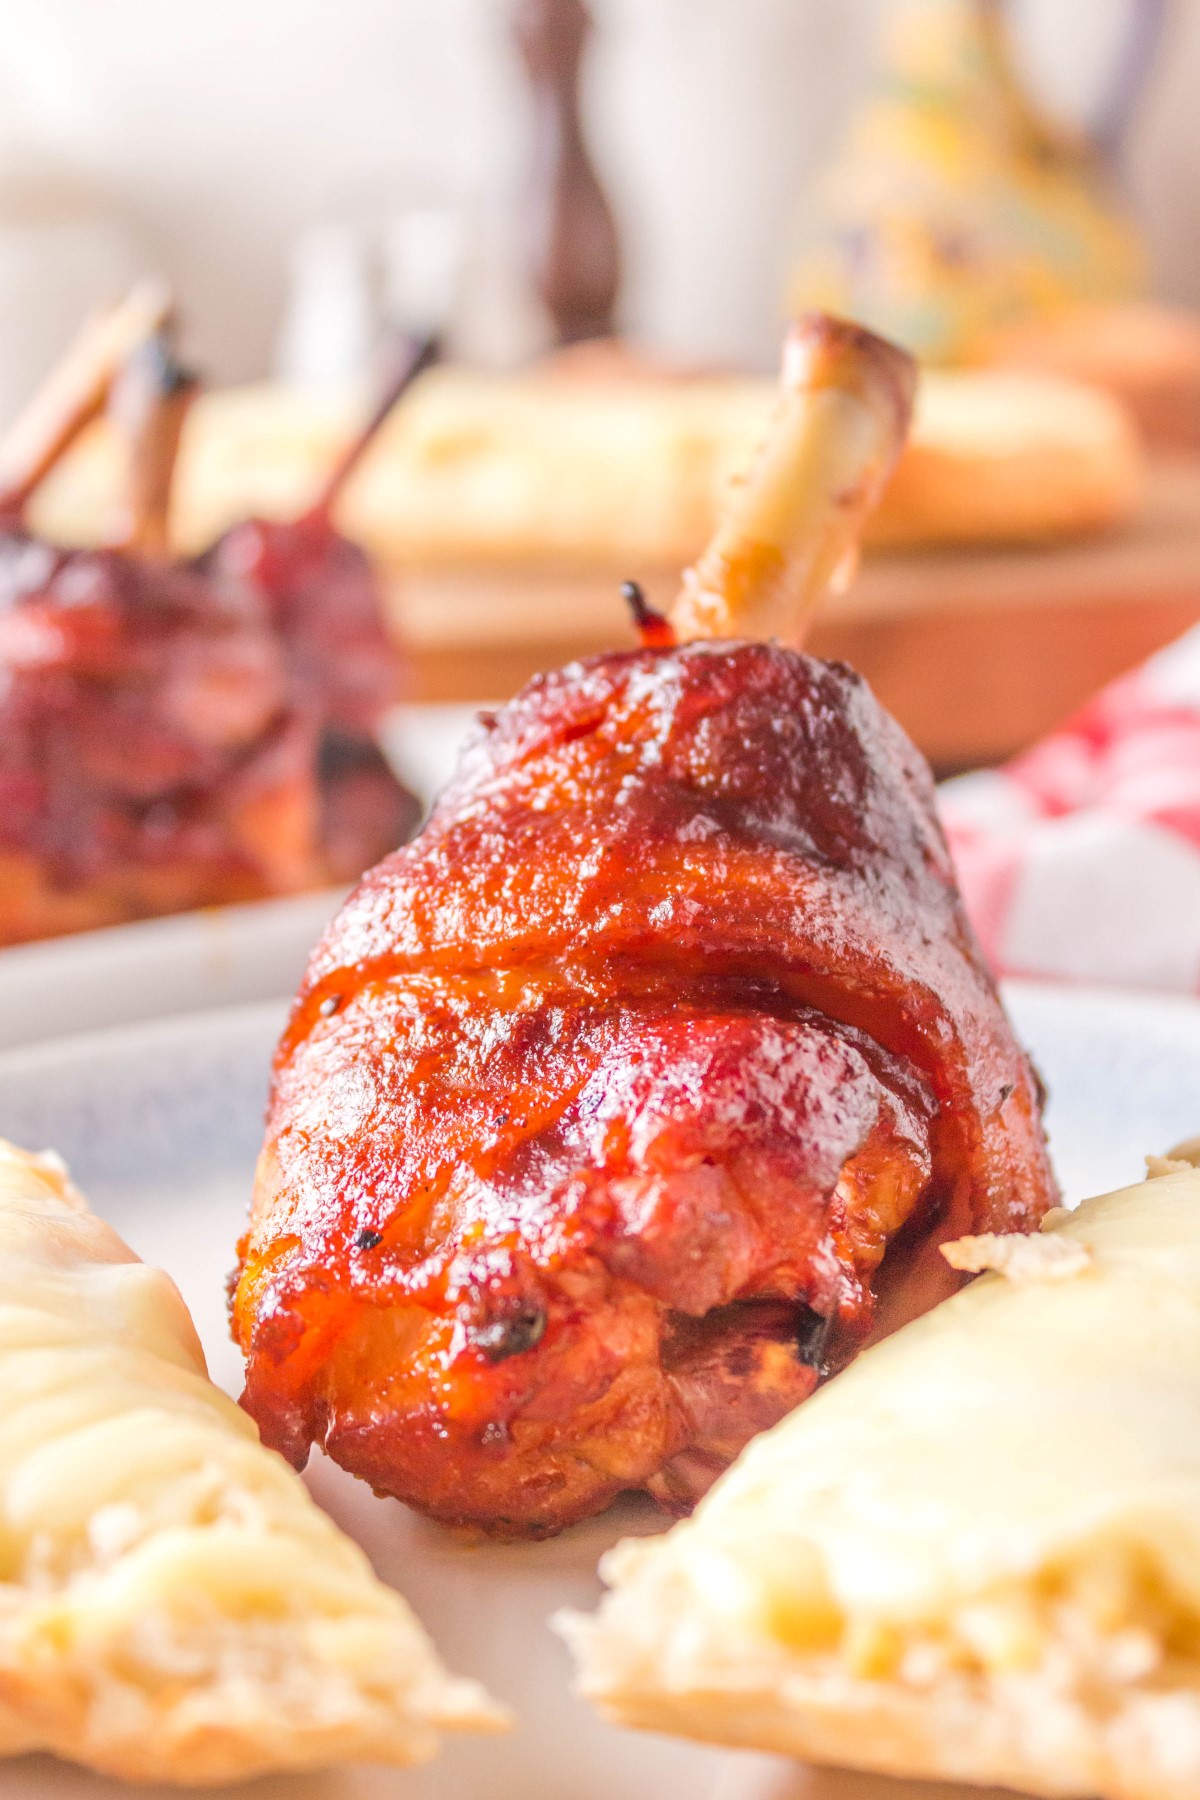 BBQ chicken lollipop on a white plate with slices of cheese bread